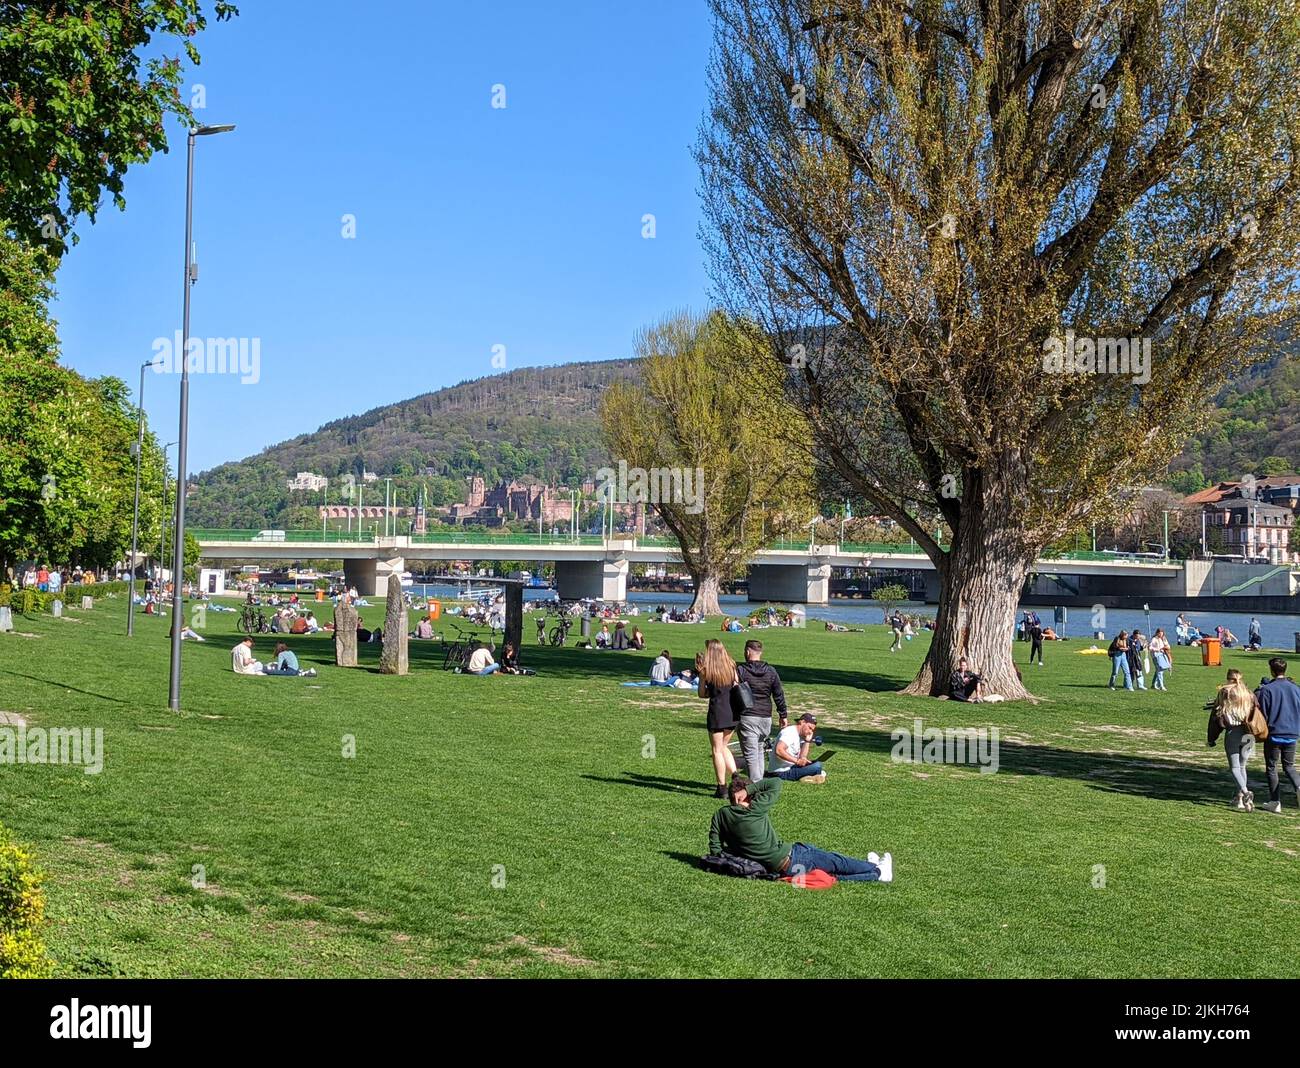 A beautiful shot of a park with people resting and walking next to Neckar river in Germany Stock Photo